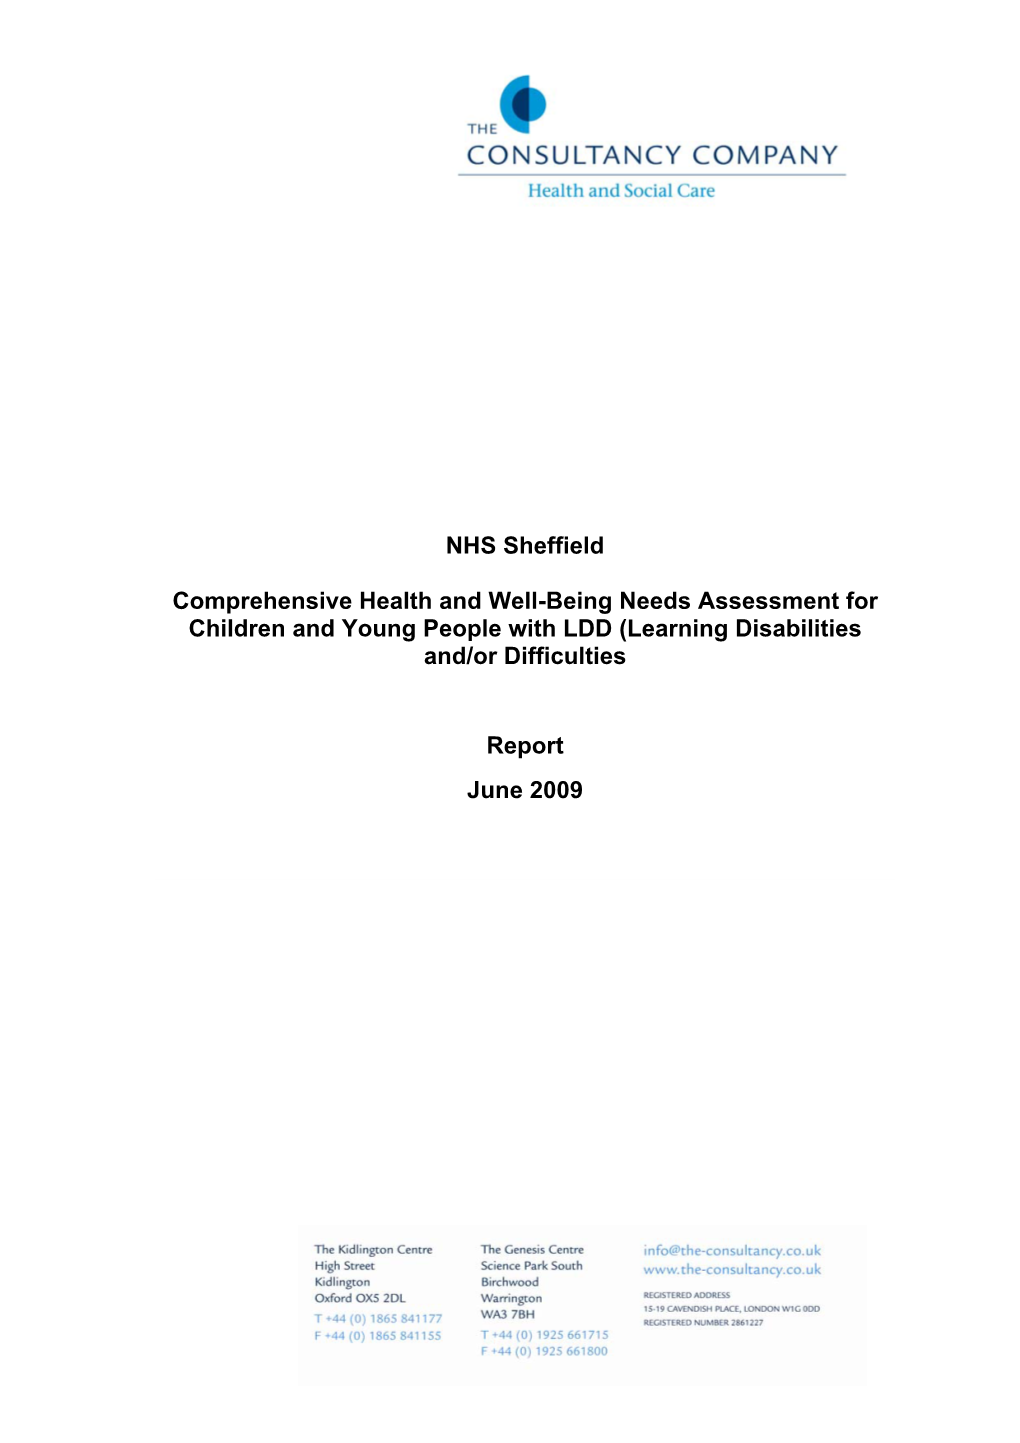 NHS Sheffield Comprehensive Health and Well-Being Needs Assessment